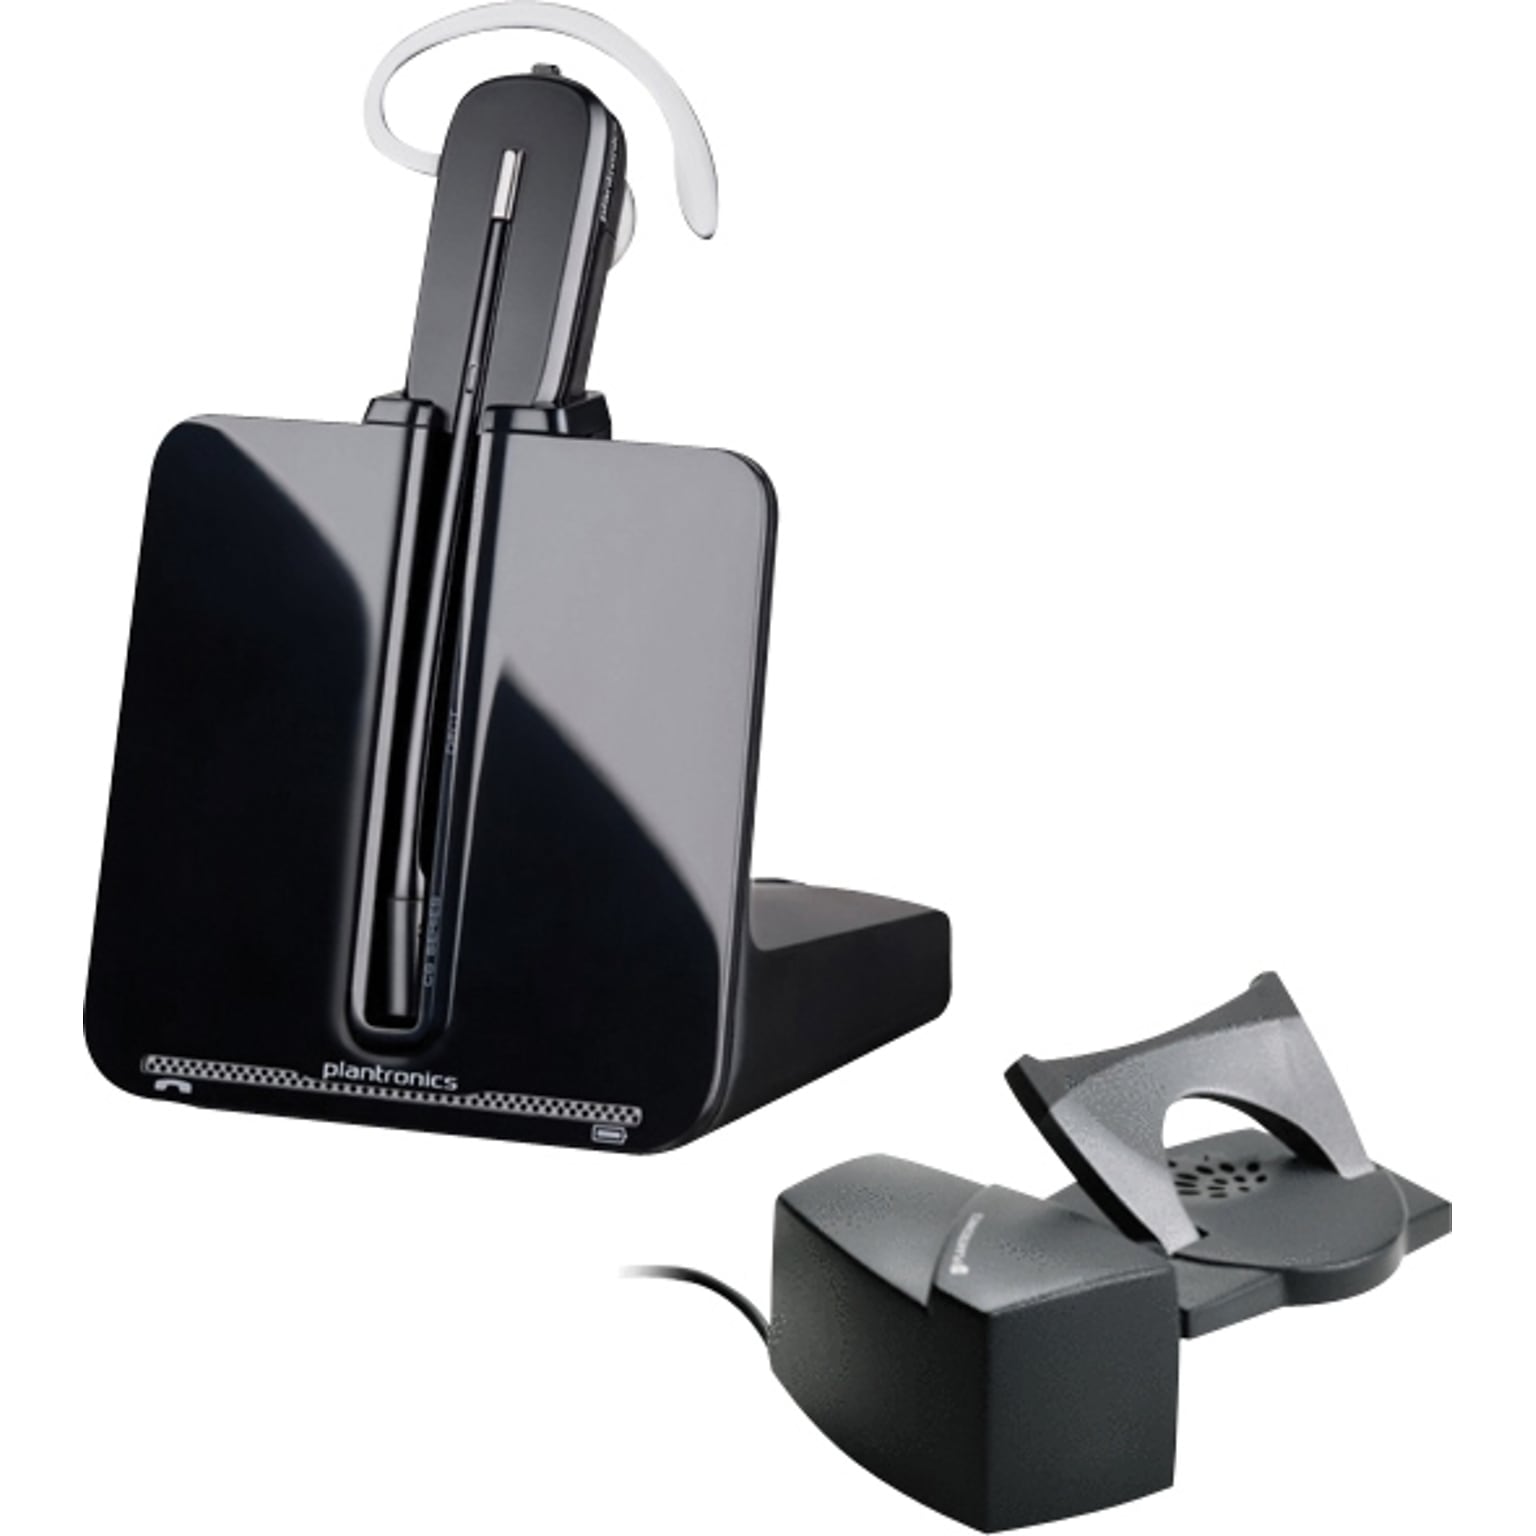 Plantronics CS540-XD Wireless Noise-Canceling Headset System with Handset Lifter (84693-11)